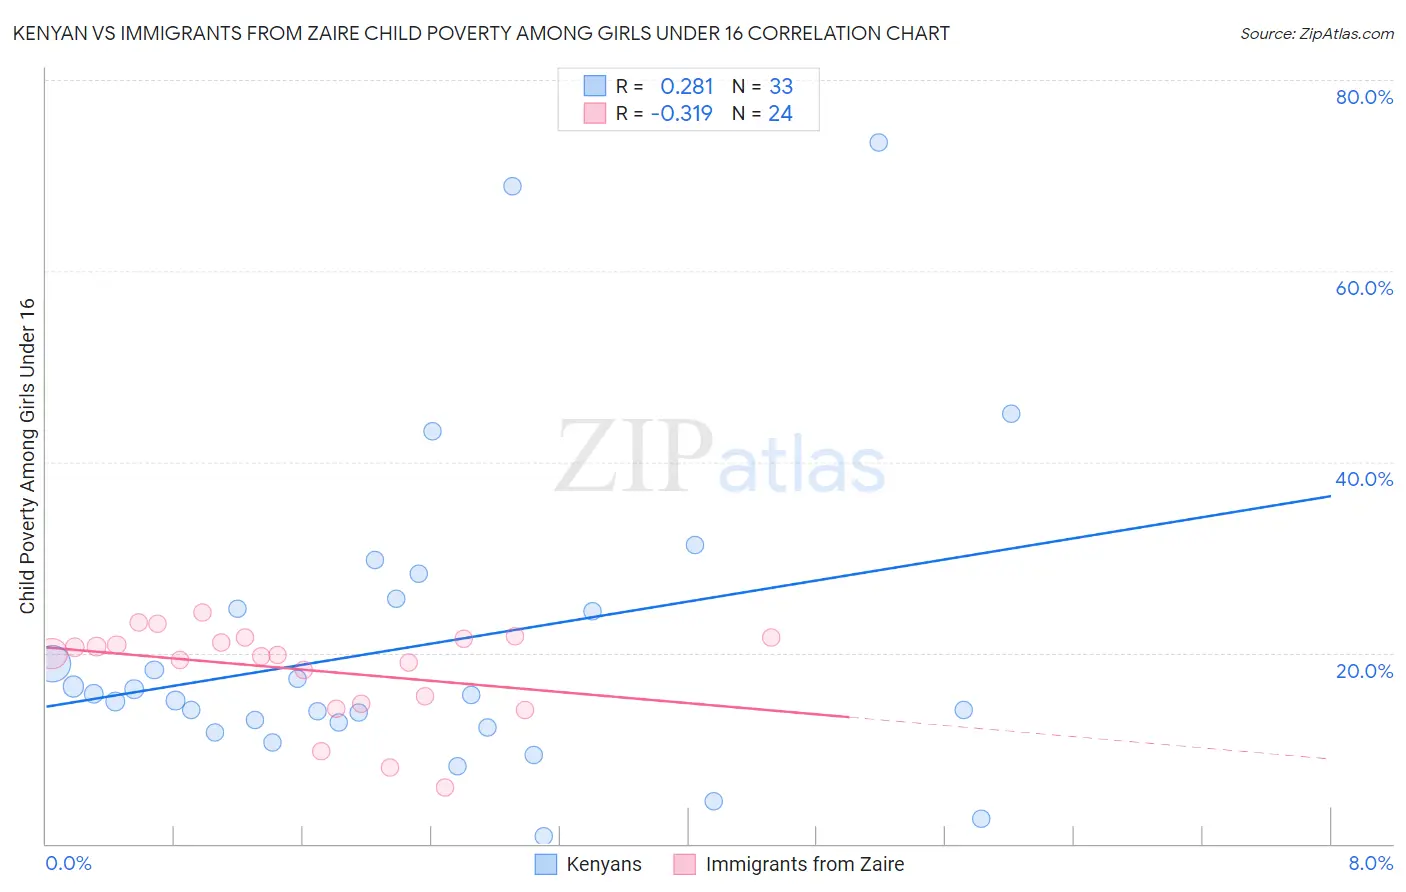 Kenyan vs Immigrants from Zaire Child Poverty Among Girls Under 16